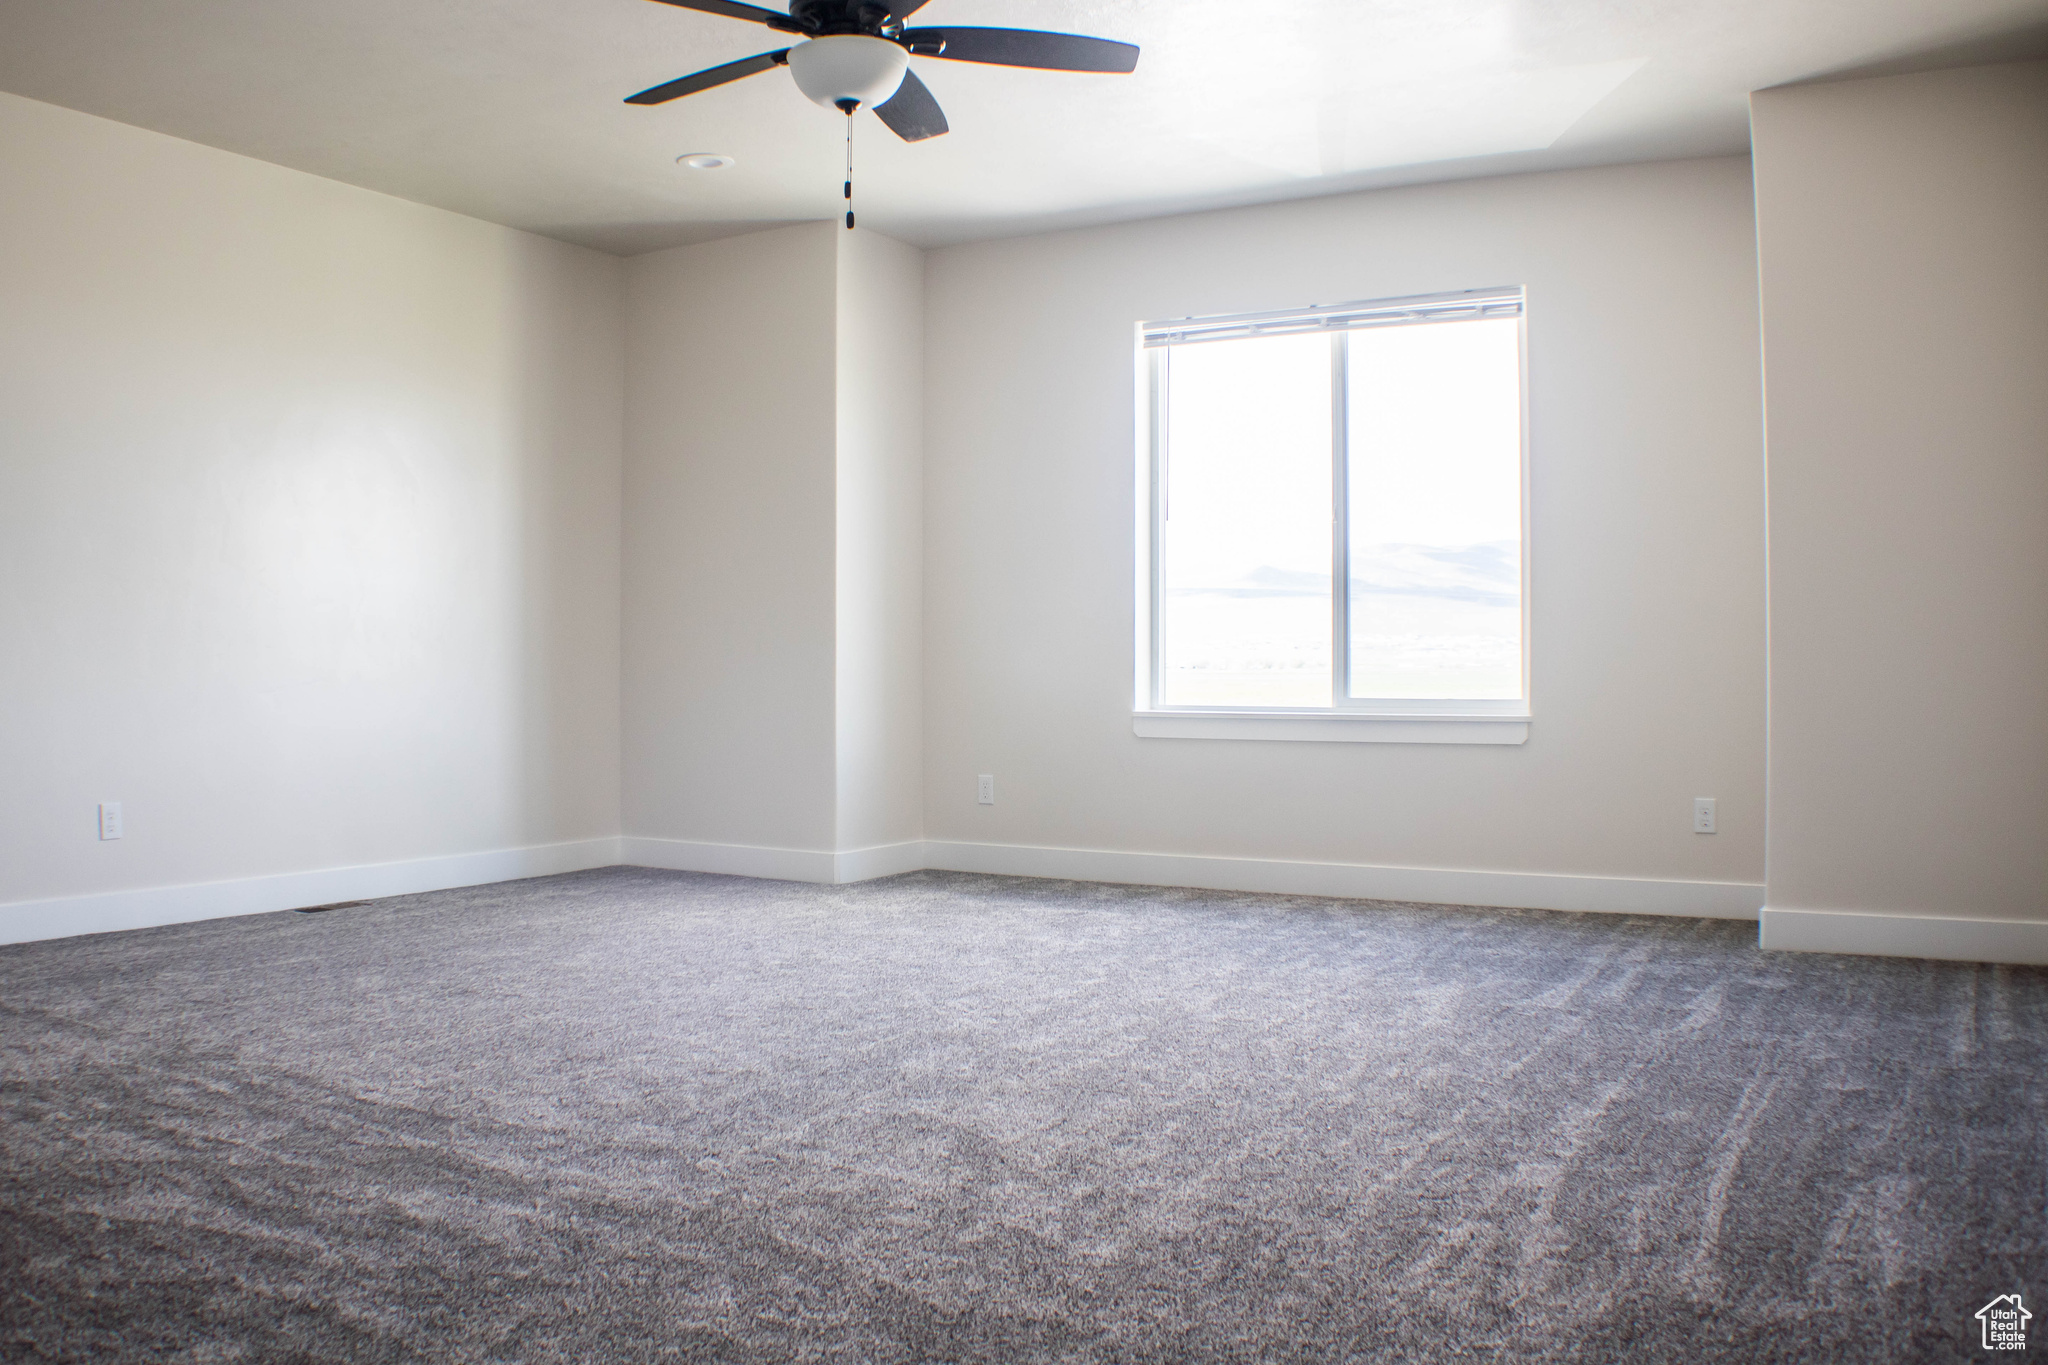 Empty room with ceiling fan and carpet flooring